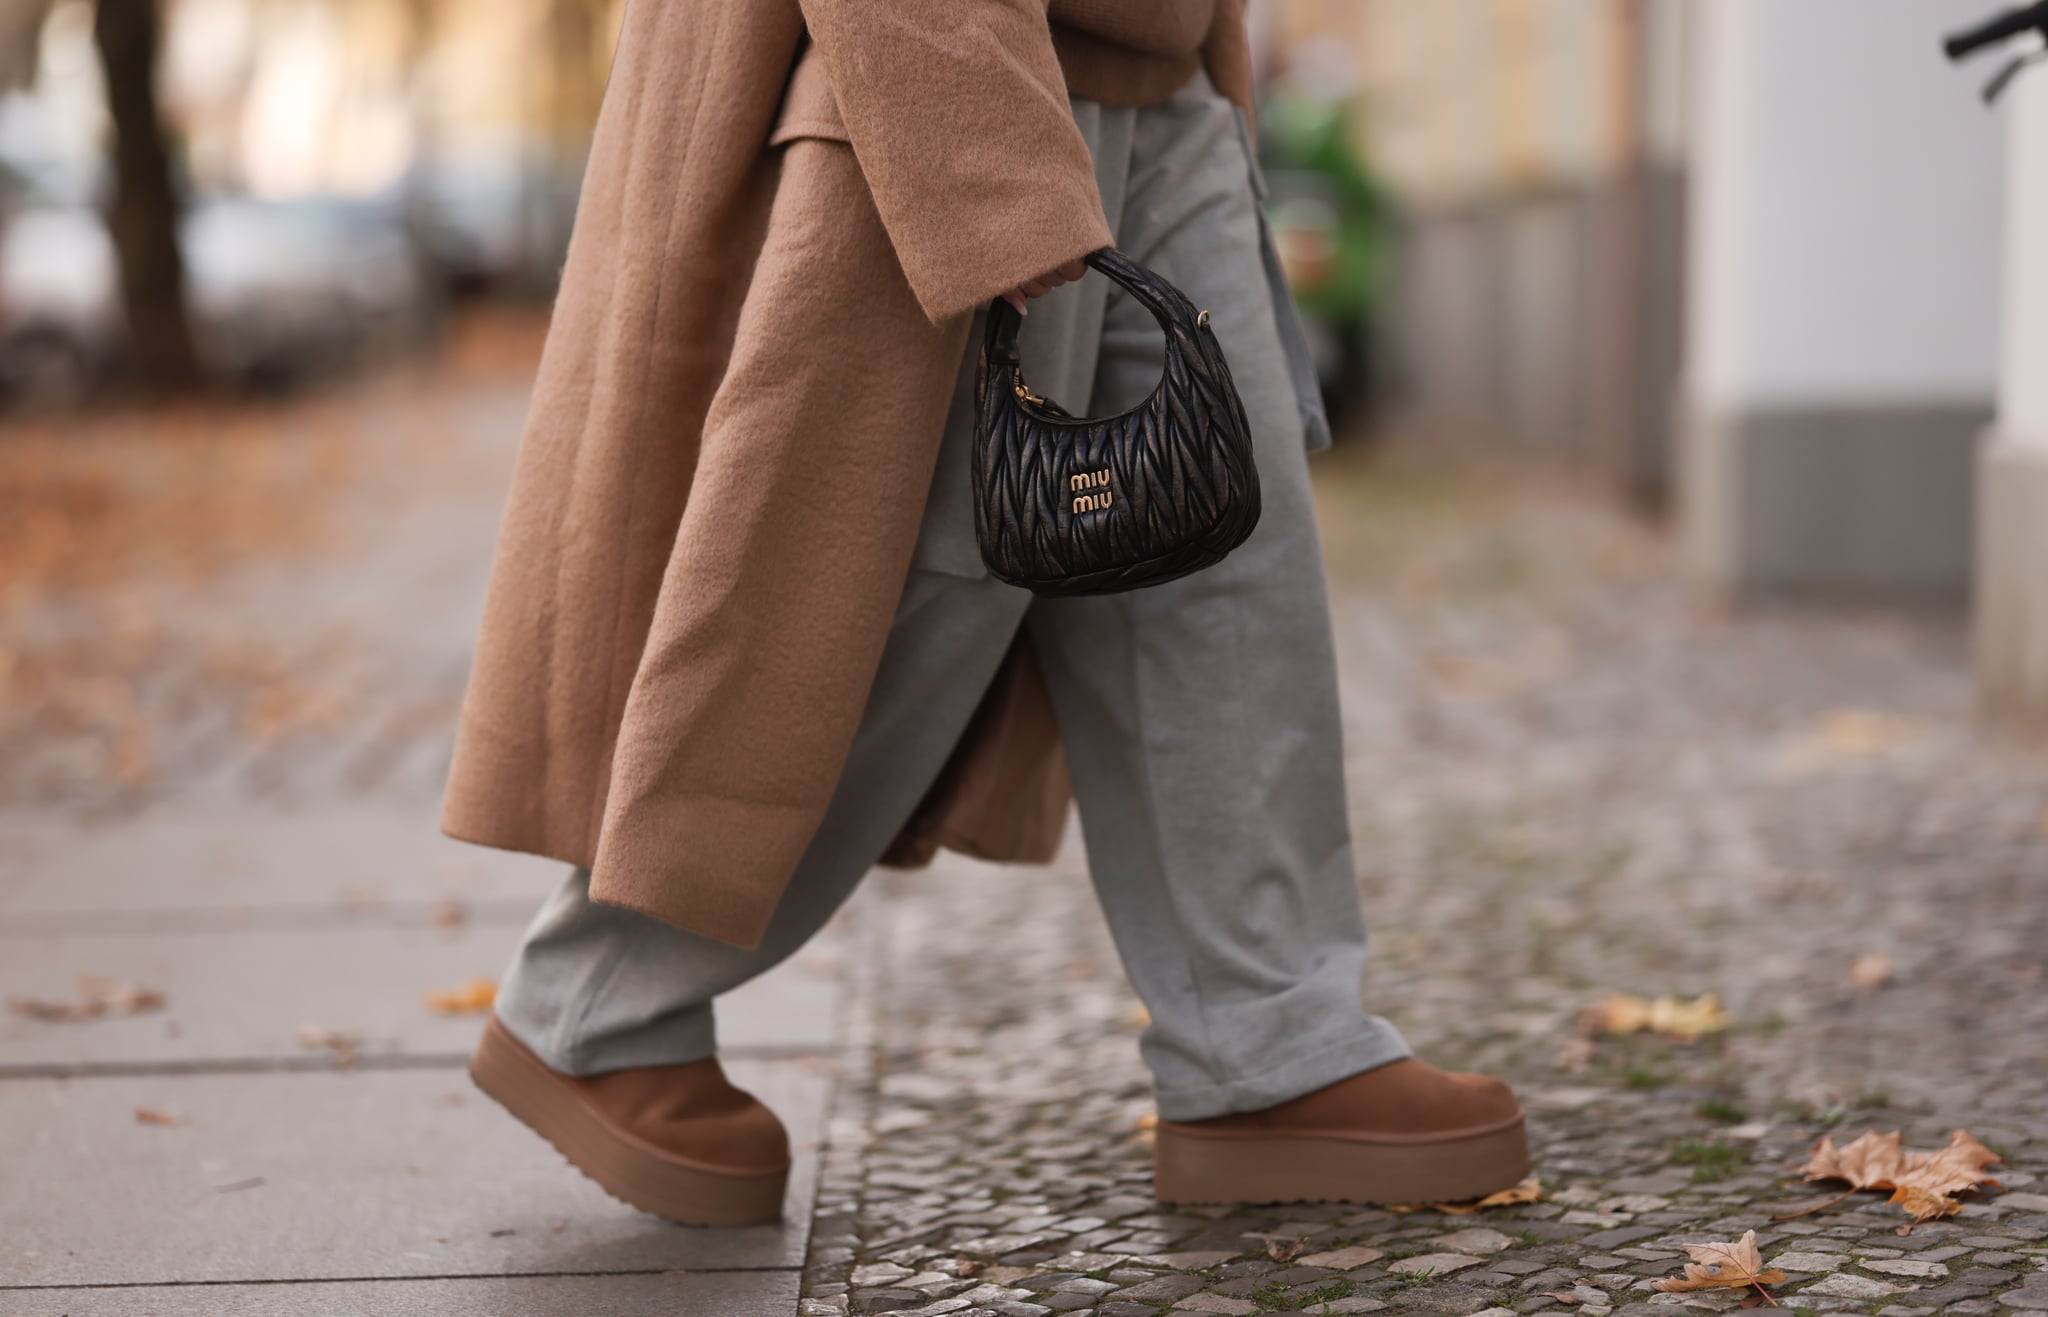 BERLIN, GERMANY - NOVEMBER 10: Sonia Lyson seen wearing a The Frankie Shop beige oversized coat and grey joggingpants pants, a Lala Berlin beige knit turtleneck sweater, Ugg plateau ultra mini beige boots and a Miu Miu Wander Hobo brown leather bag on November 10, 2022 in Berlin, Germany. (Photo by Jeremy Moeller/Getty Images)